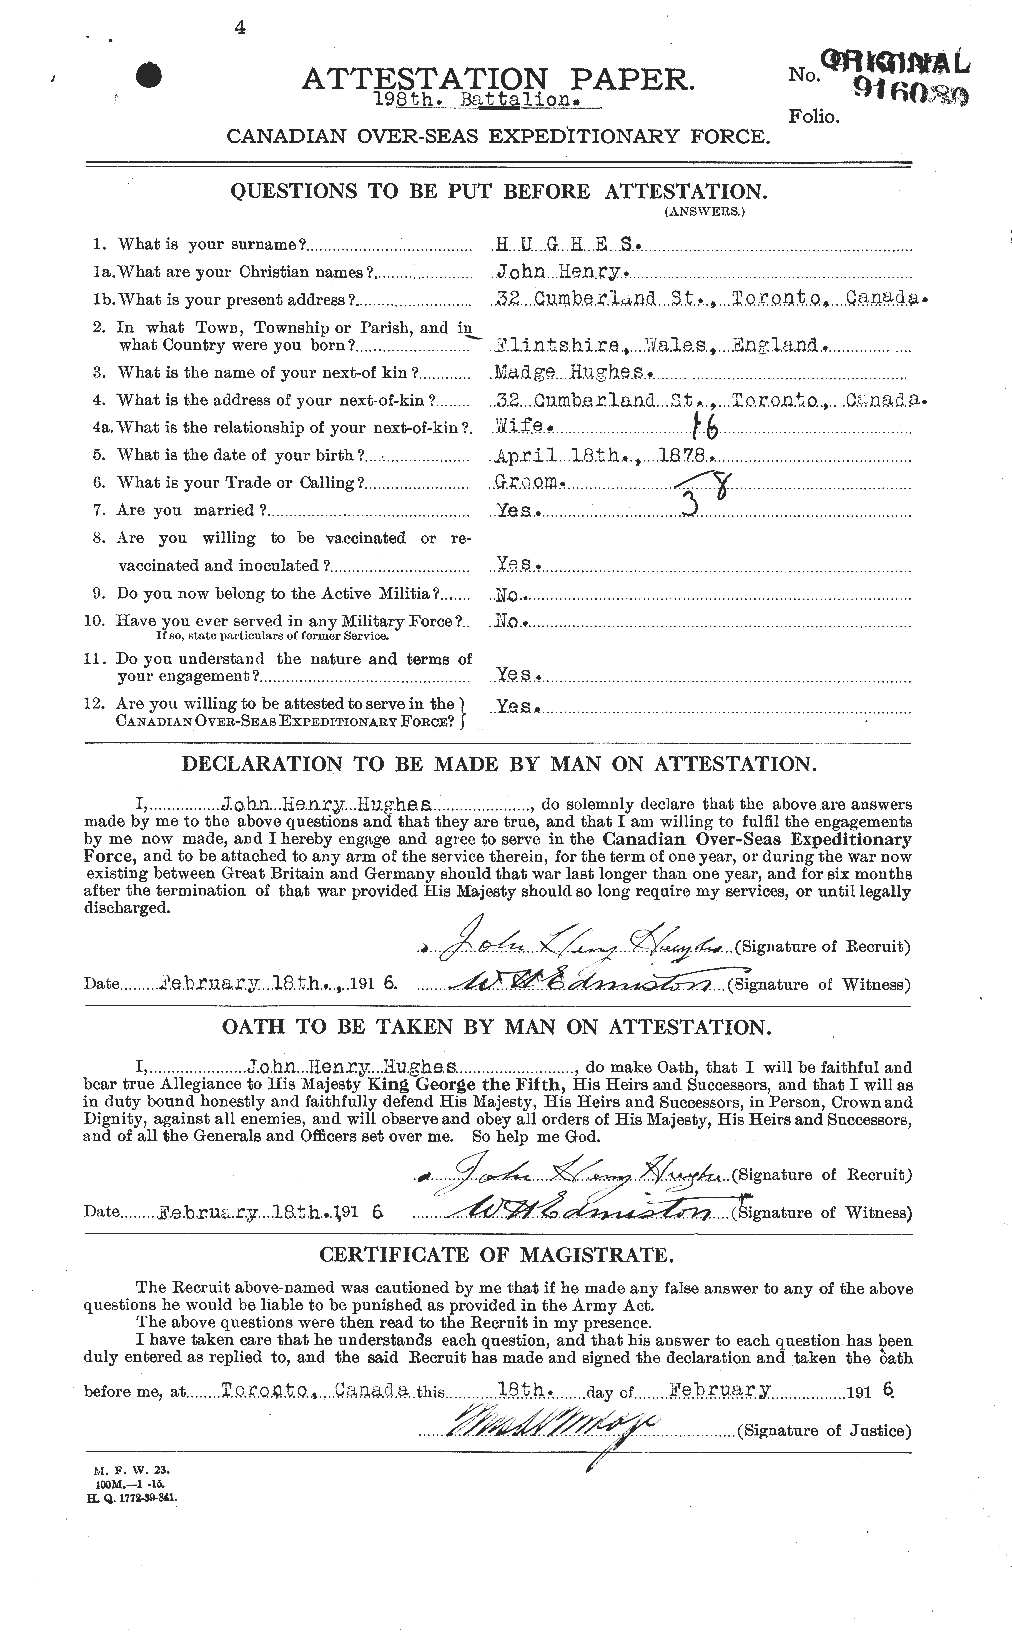 Personnel Records of the First World War - CEF 404030a